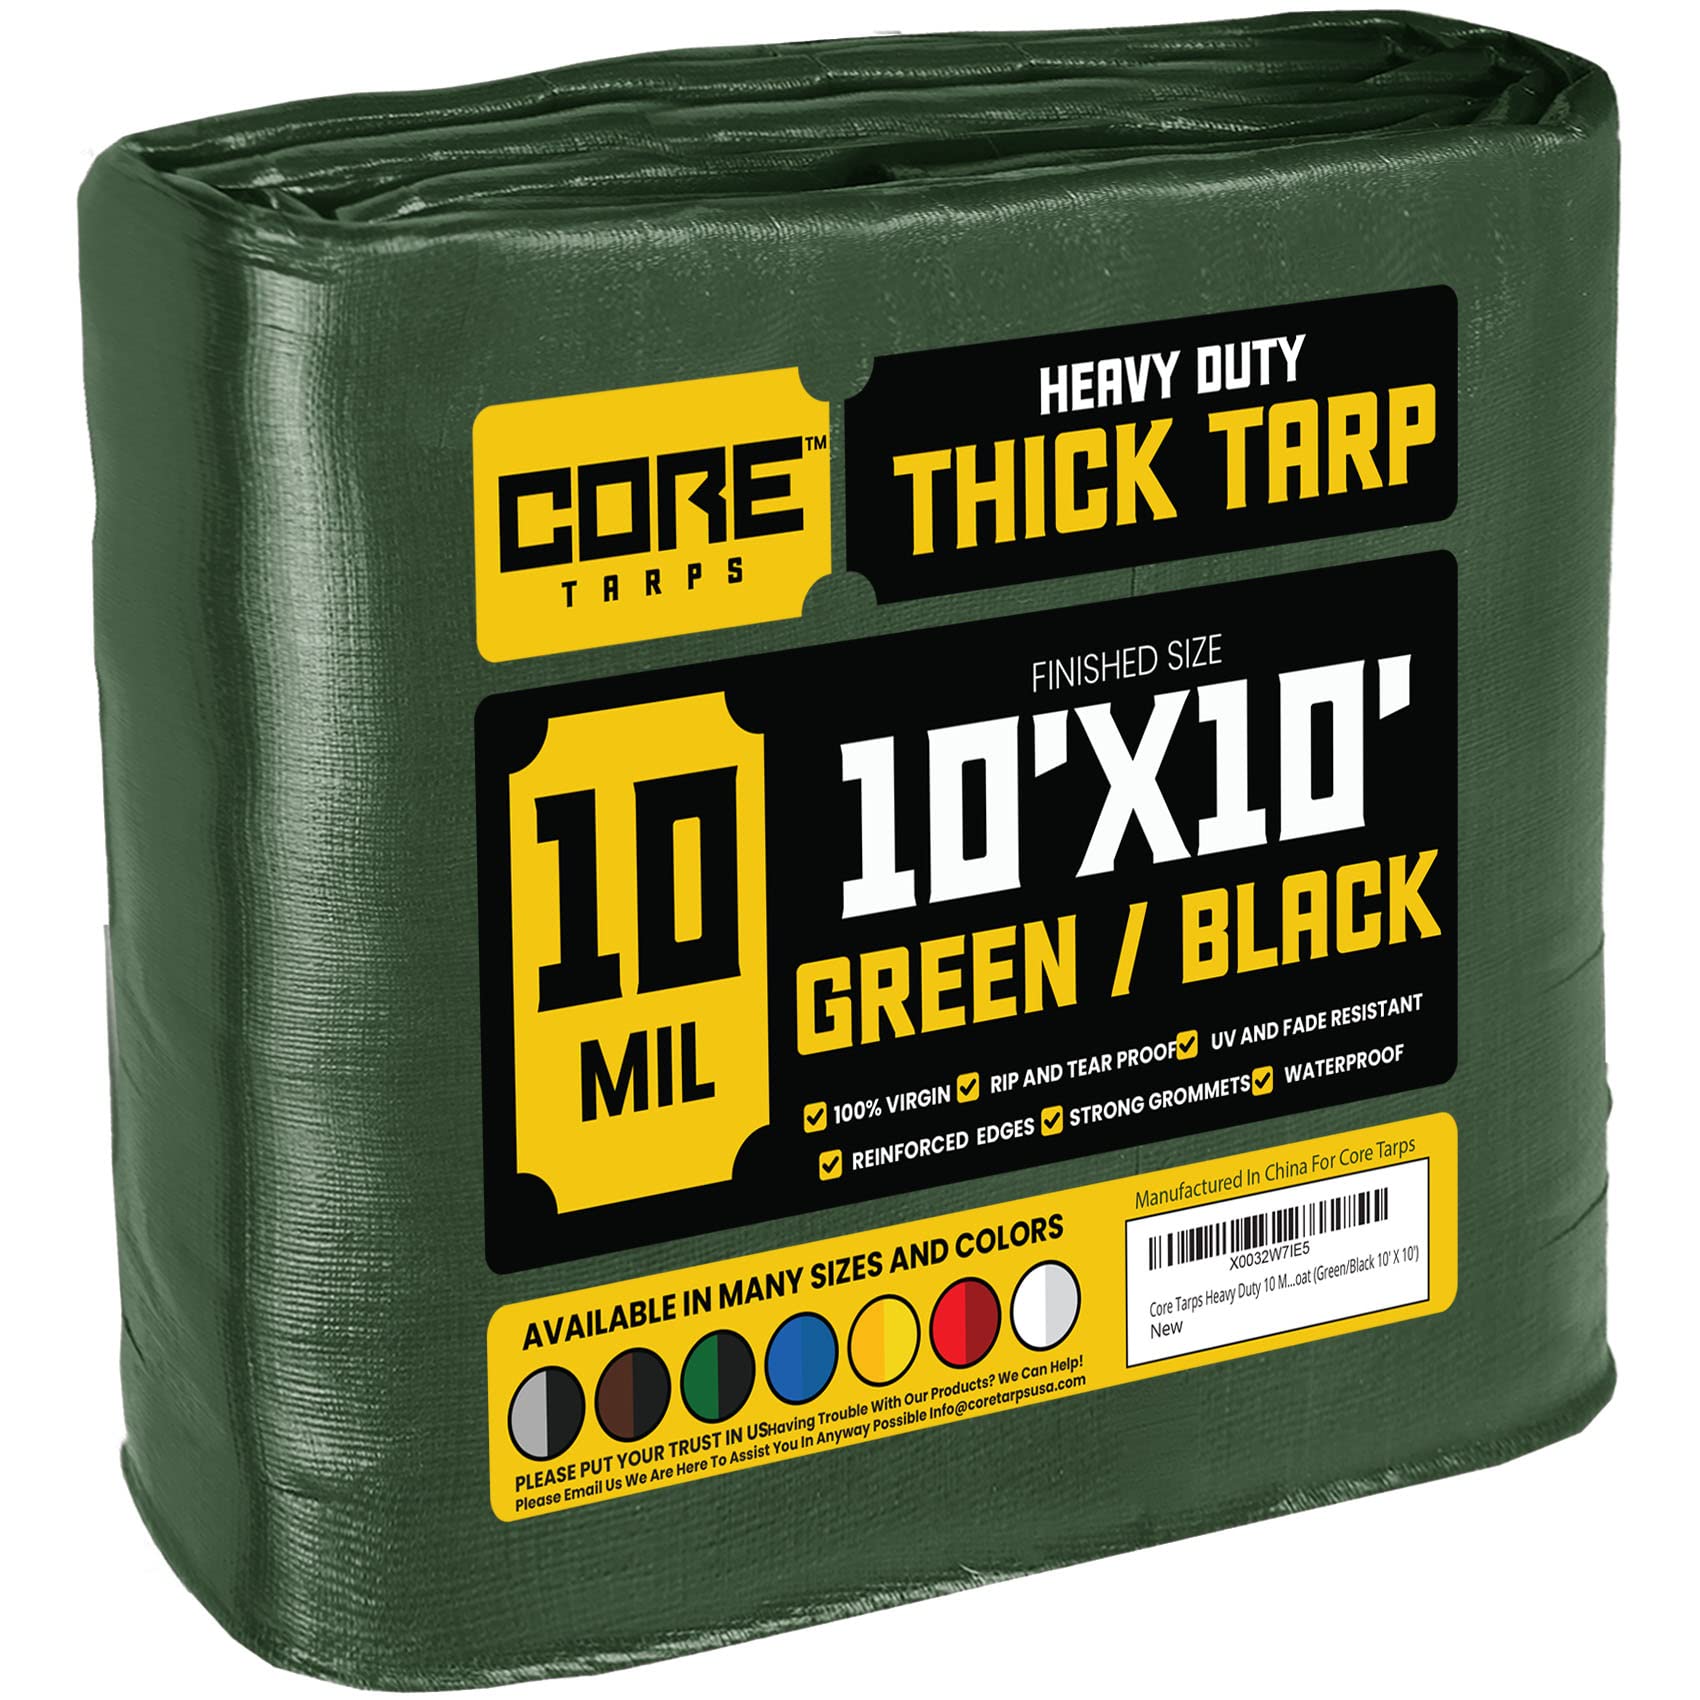 core Tarps Heavy Duty 10 Mil Tarp cover, Waterproof, UV Resistant, Rip and Tear Proof, Poly Tarpaulin with Reinforced Edges for 